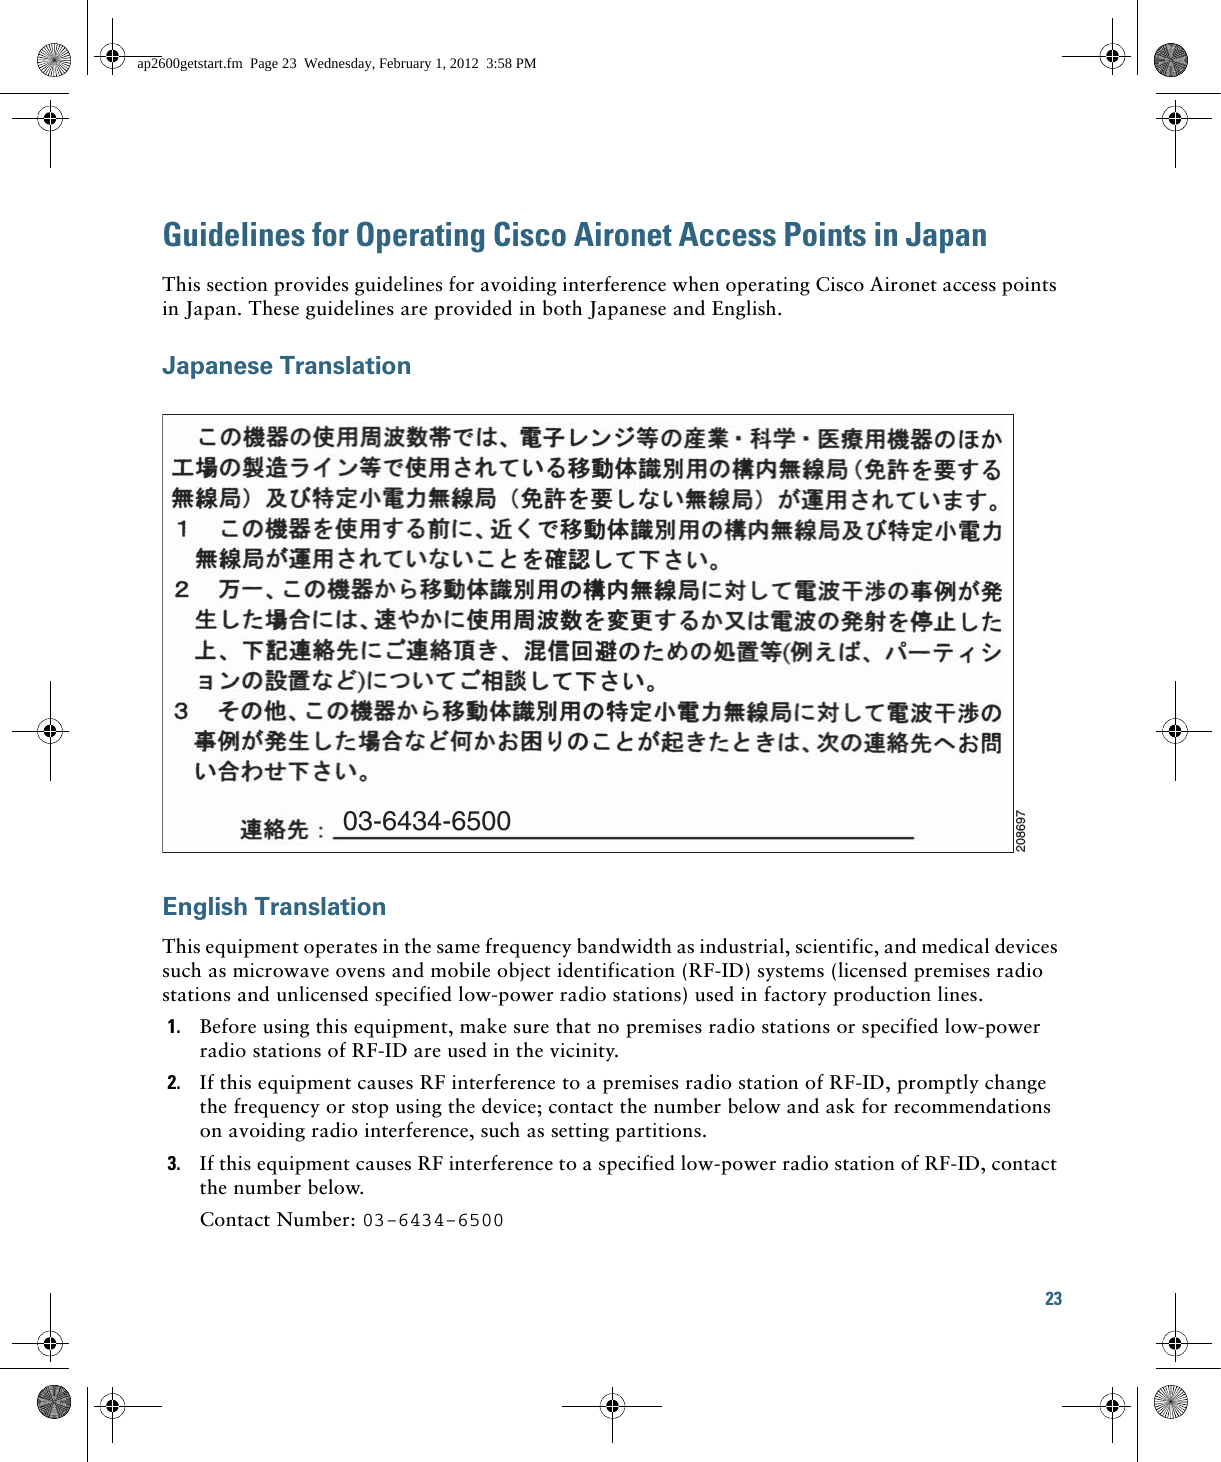 23 Guidelines for Operating Cisco Aironet Access Points in JapanThis section provides guidelines for avoiding interference when operating Cisco Aironet access points in Japan. These guidelines are provided in both Japanese and English.Japanese TranslationEnglish TranslationThis equipment operates in the same frequency bandwidth as industrial, scientific, and medical devices such as microwave ovens and mobile object identification (RF-ID) systems (licensed premises radio stations and unlicensed specified low-power radio stations) used in factory production lines.1. Before using this equipment, make sure that no premises radio stations or specified low-power radio stations of RF-ID are used in the vicinity.2. If this equipment causes RF interference to a premises radio station of RF-ID, promptly change the frequency or stop using the device; contact the number below and ask for recommendations on avoiding radio interference, such as setting partitions.3. If this equipment causes RF interference to a specified low-power radio station of RF-ID, contact the number below.Contact Number: 03-6434-650003-6434-6500208697ap2600getstart.fm  Page 23  Wednesday, February 1, 2012  3:58 PM